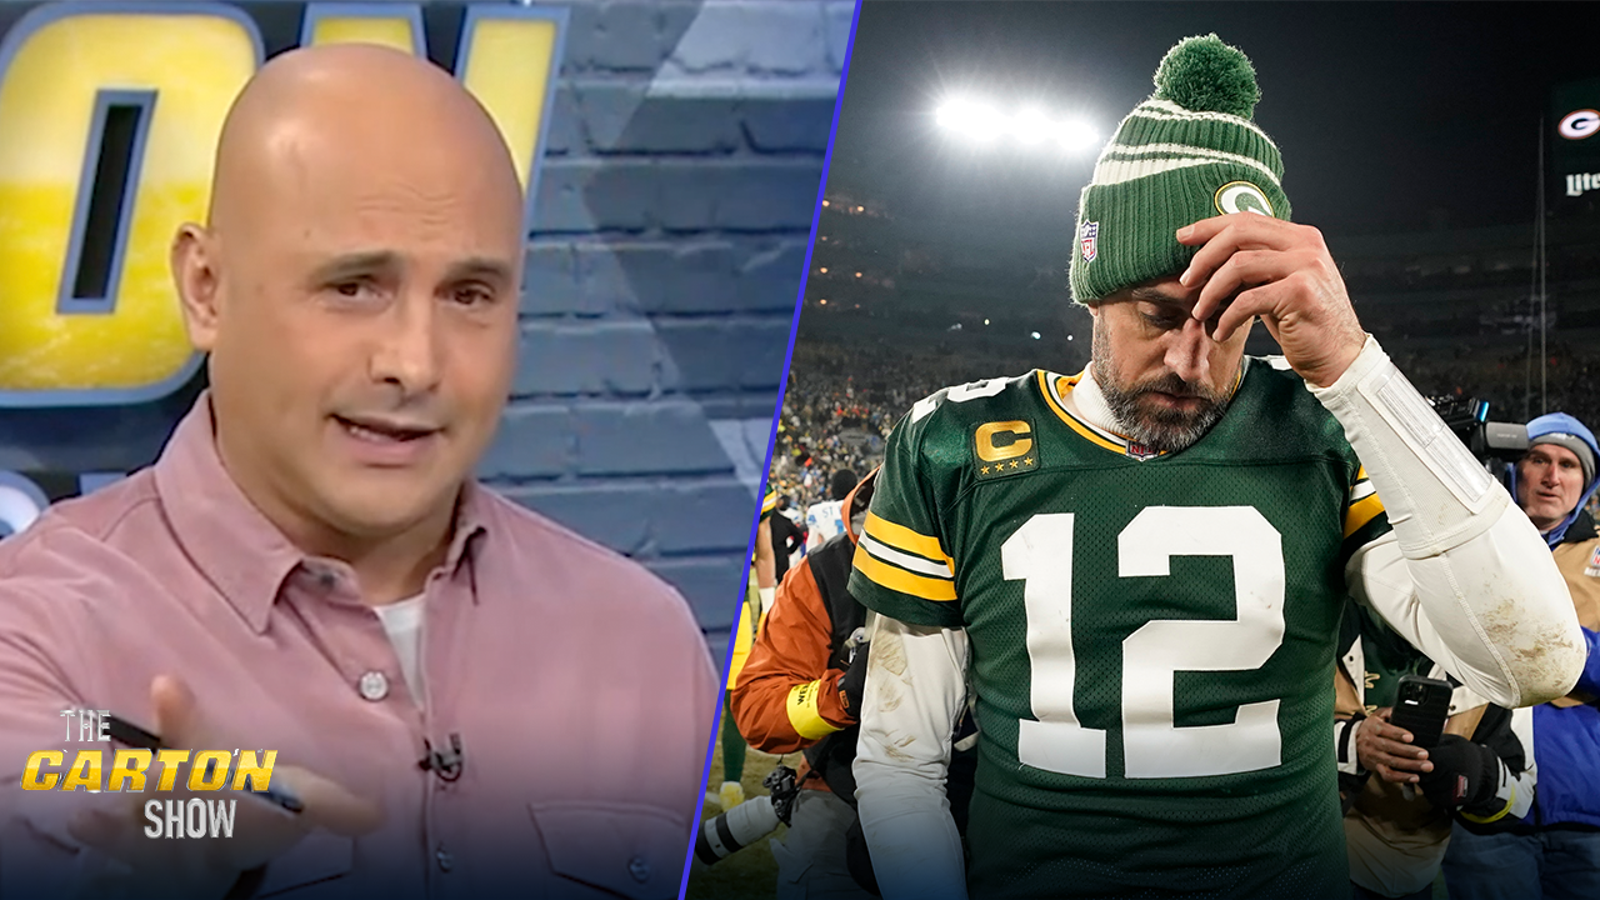 Packers playoffs spoiled, Aaron Rodgers last game in GB?